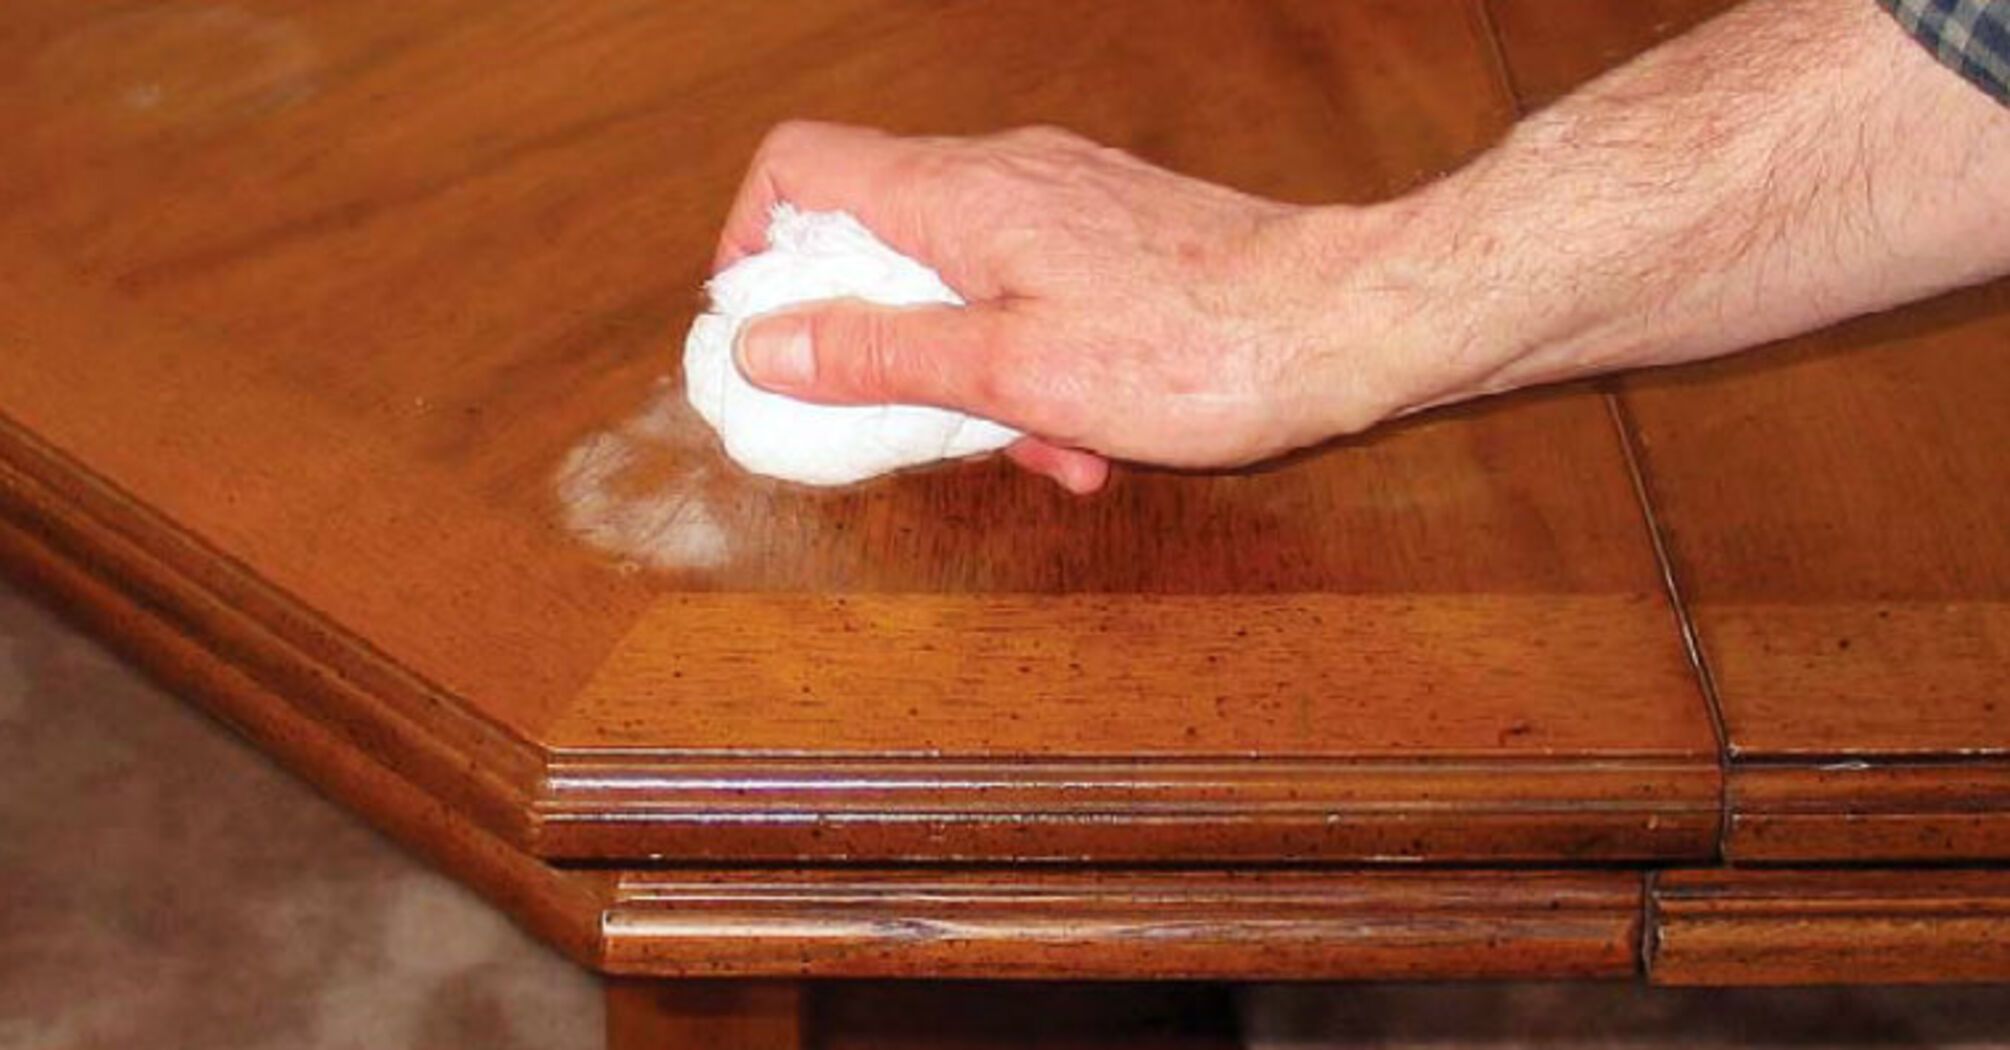 How to remove stains from wooden furniture